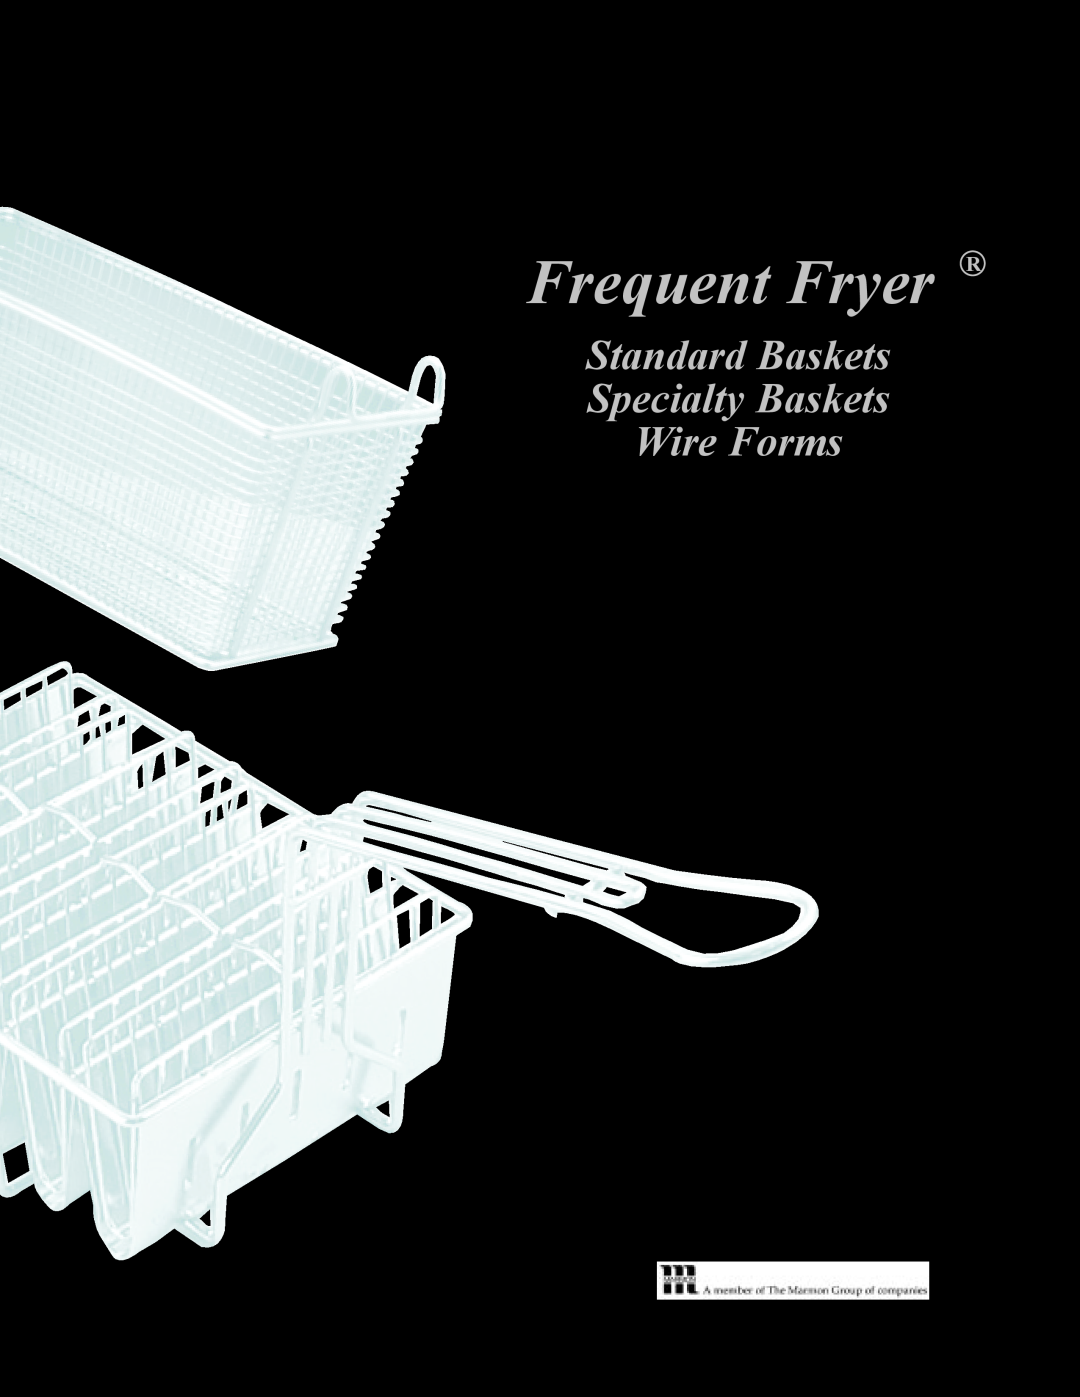 Prince Castle 670-6, 683, 681, 670-4 manual Frequent Fryer R, Standard Baskets Specialty Baskets Wire Forms 